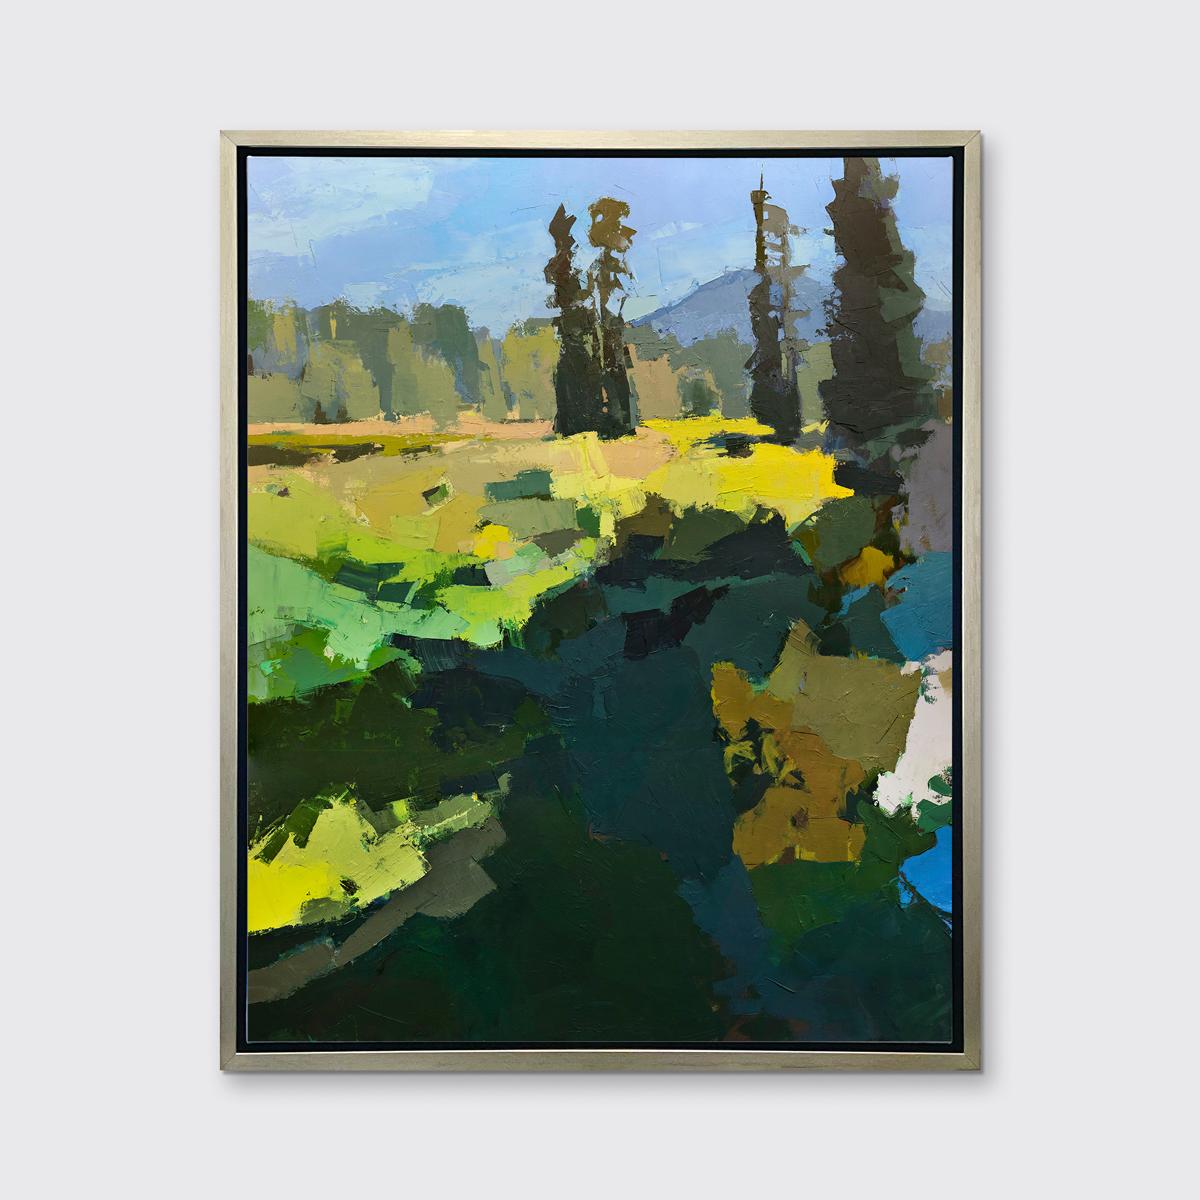 Bri Custer Landscape Print - "A Propensity for Growth" Framed Limited Edition Print, 45" x 36"